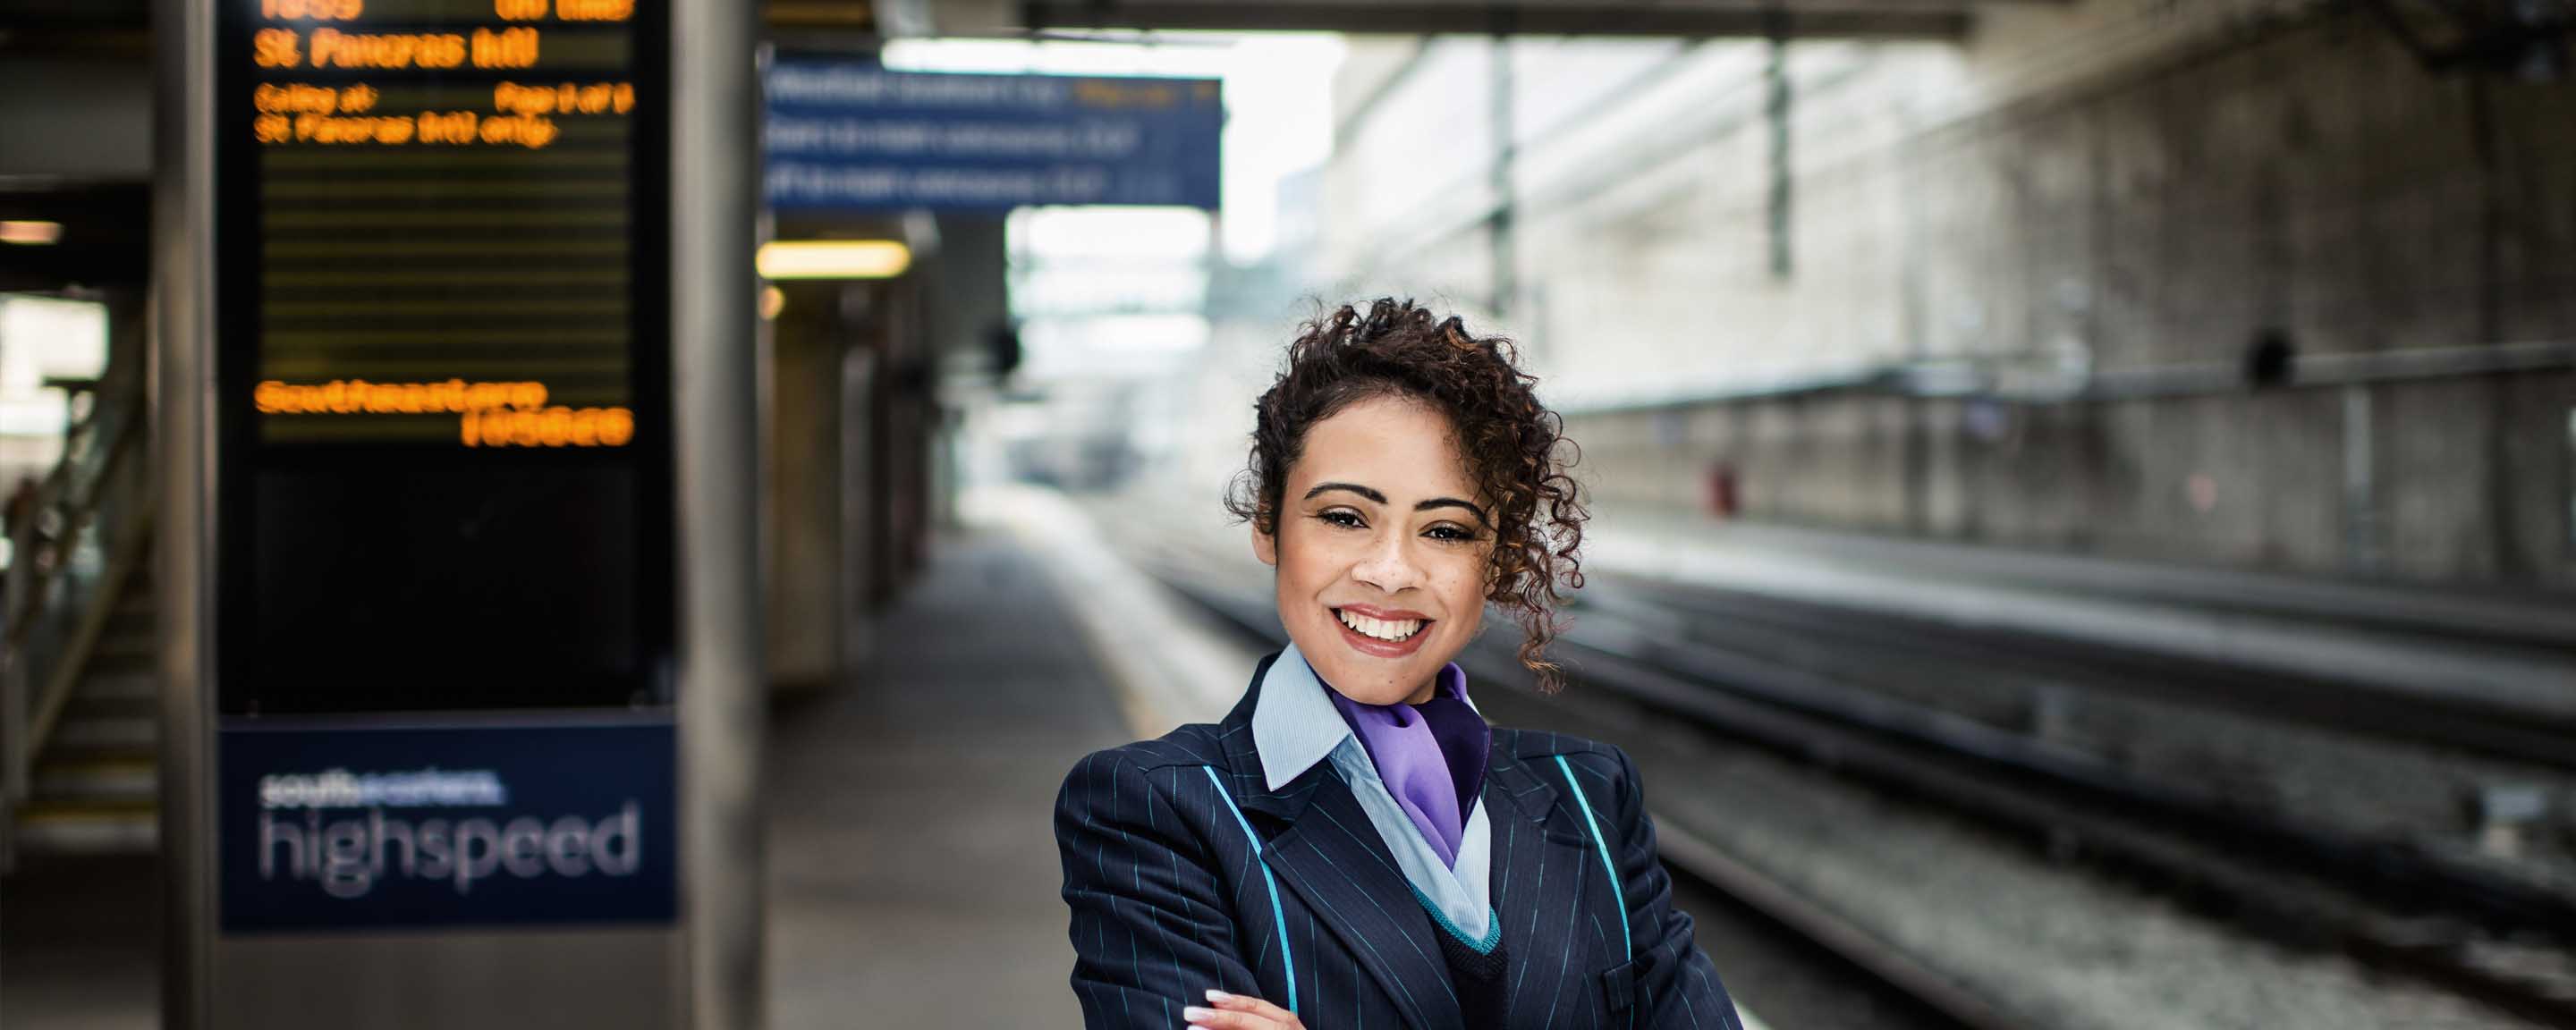 Smiley woman in station